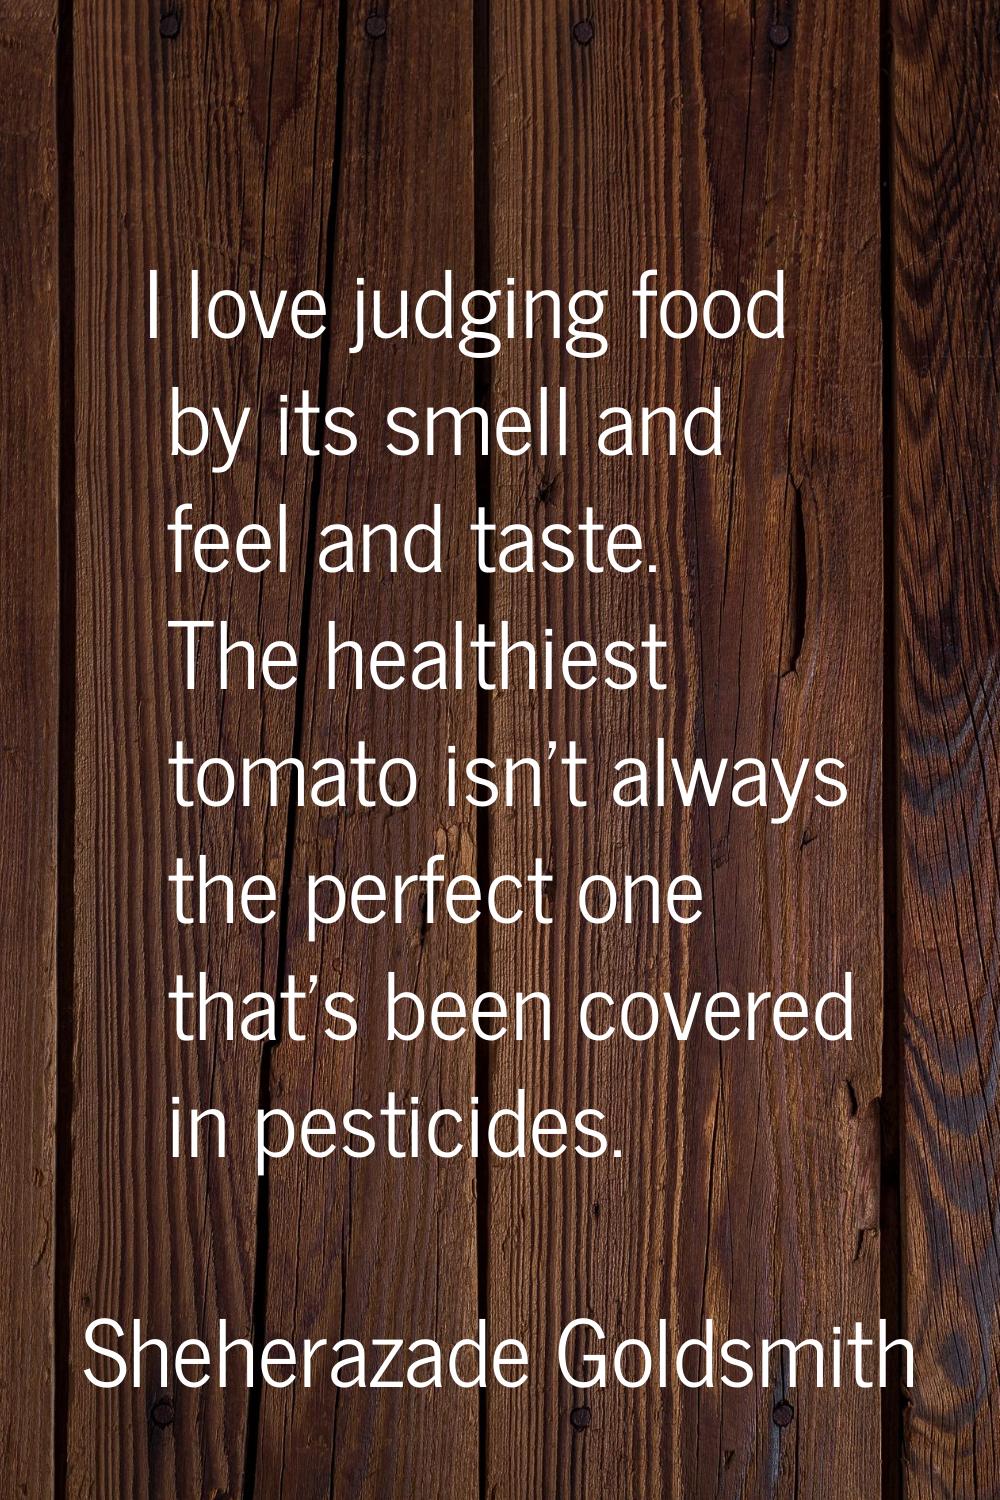 I love judging food by its smell and feel and taste. The healthiest tomato isn't always the perfect